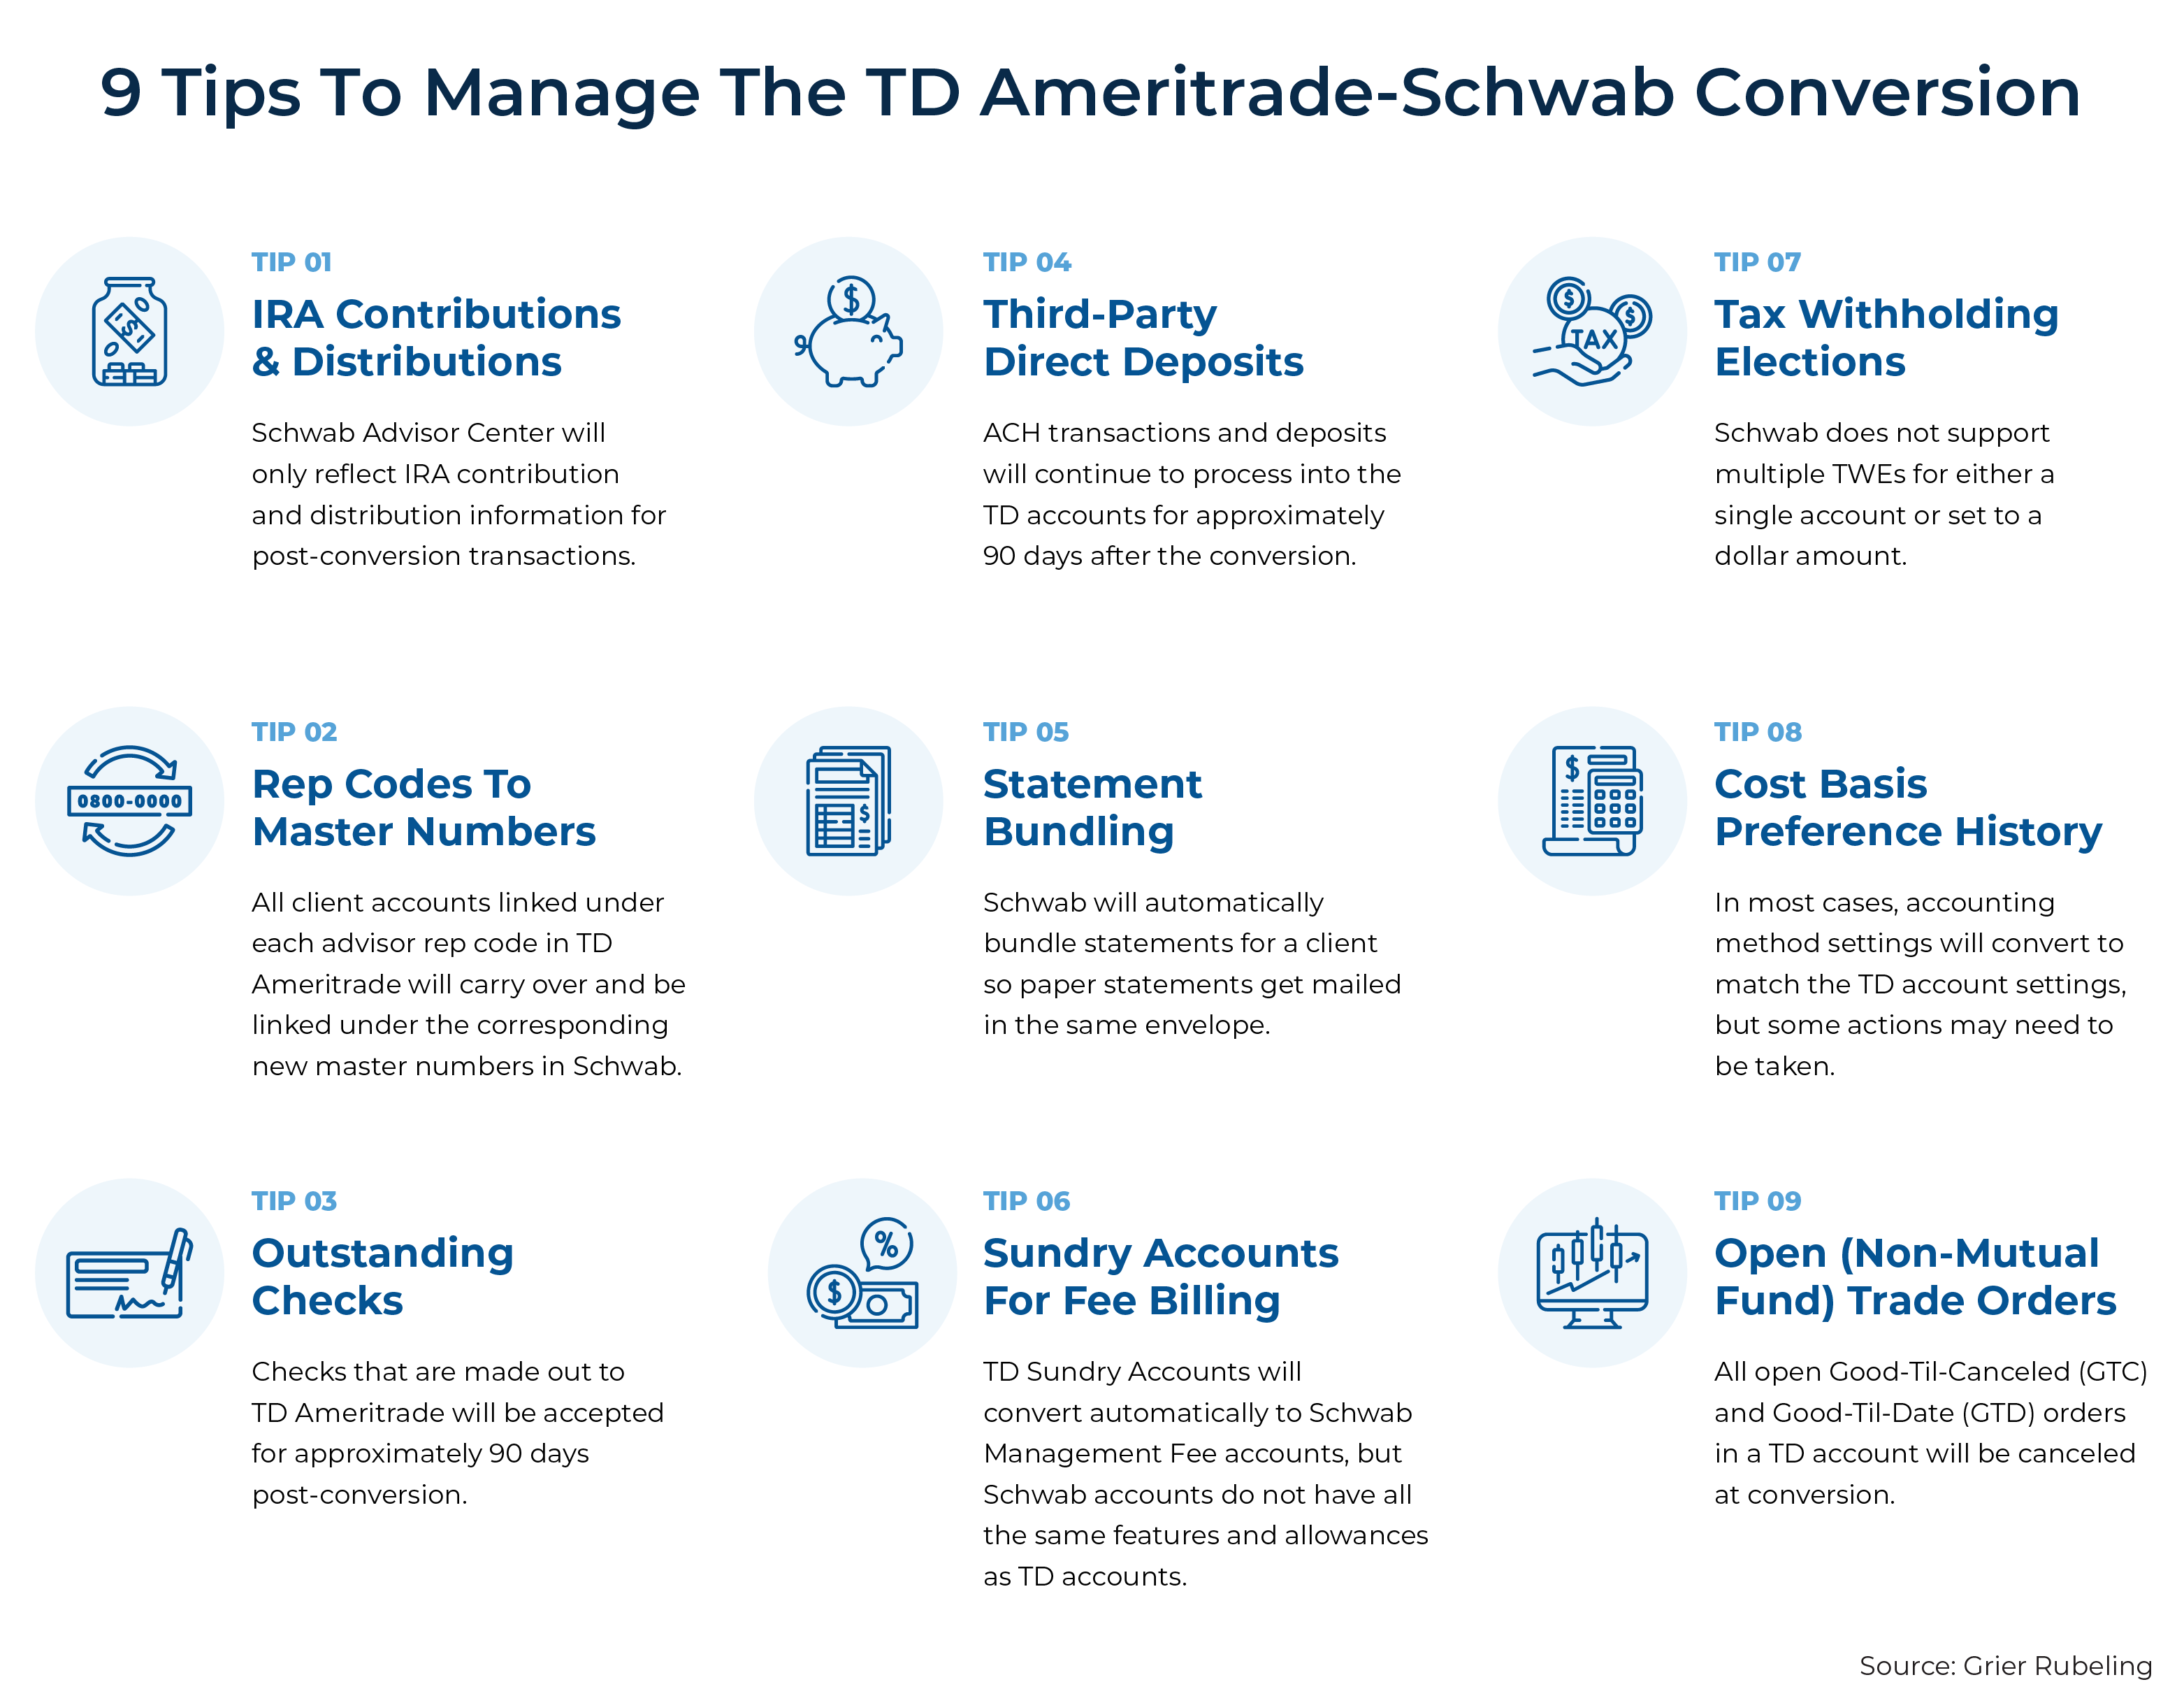 Tips To Manage TD Ameritrade to Schwab Conversion